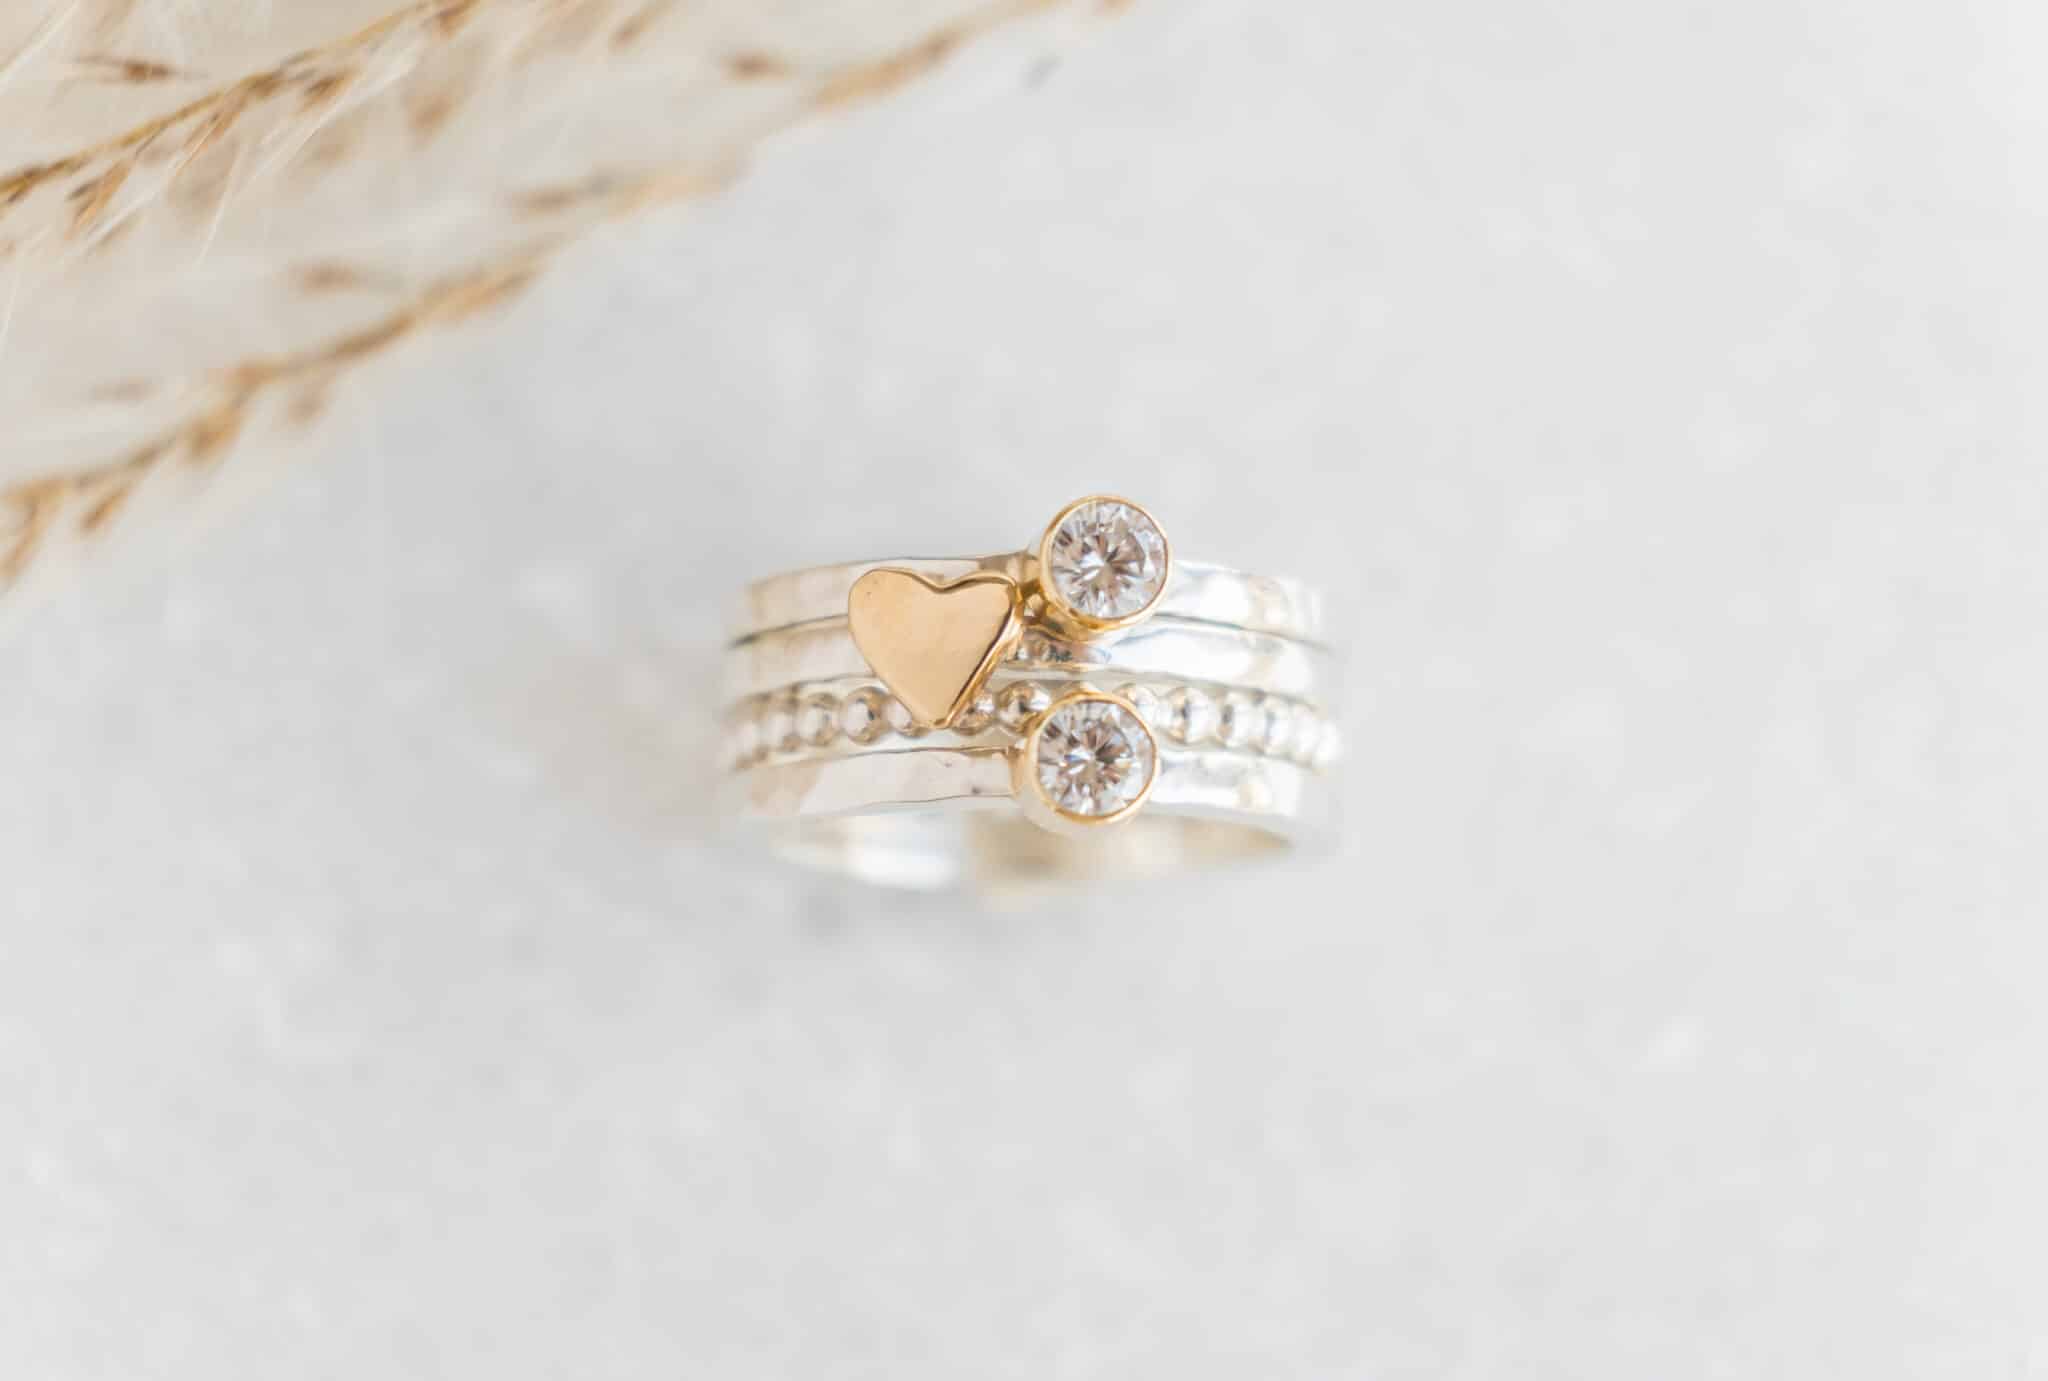 By Rebecca bespoke stacker rings. Create your own design